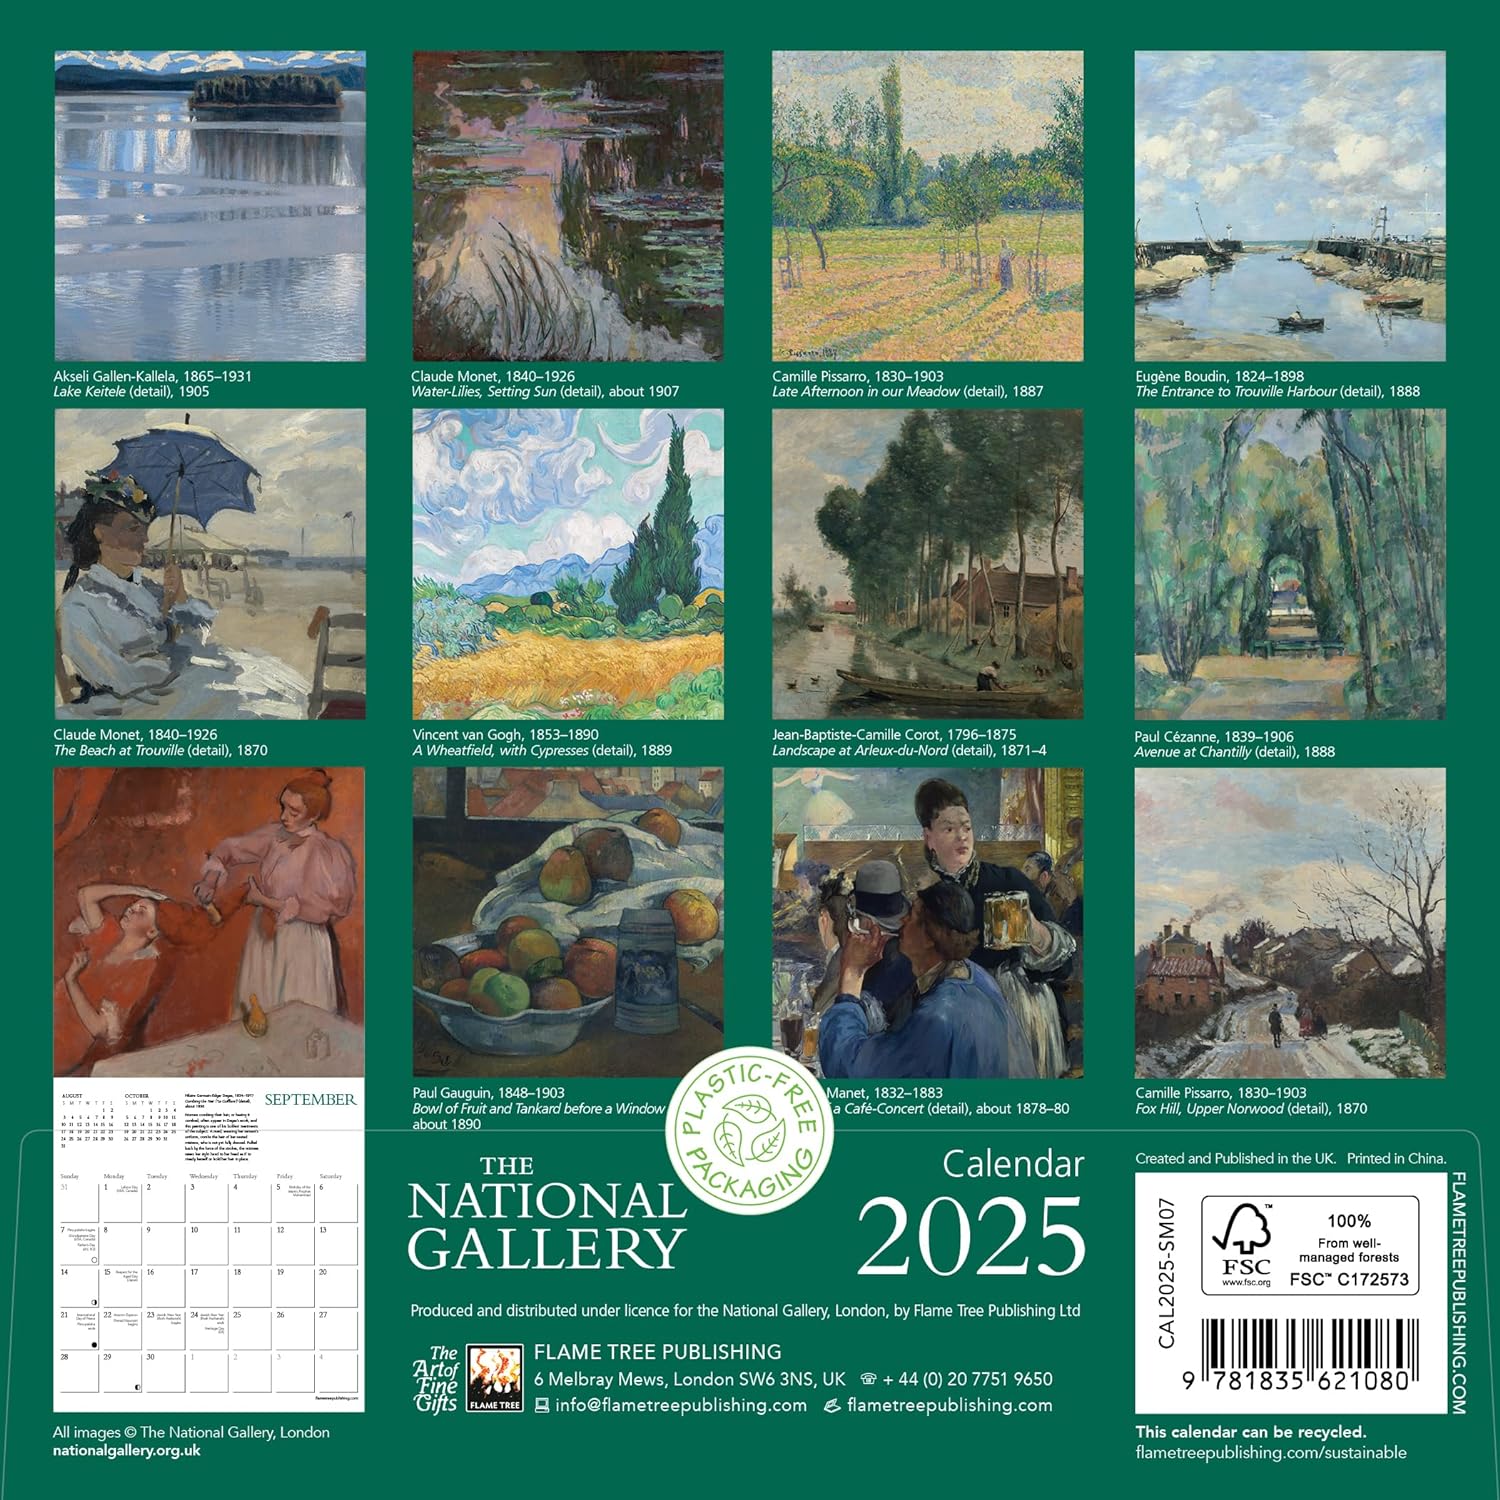 Calendar 2025 - The National Gallery | Flame Tree Publishing